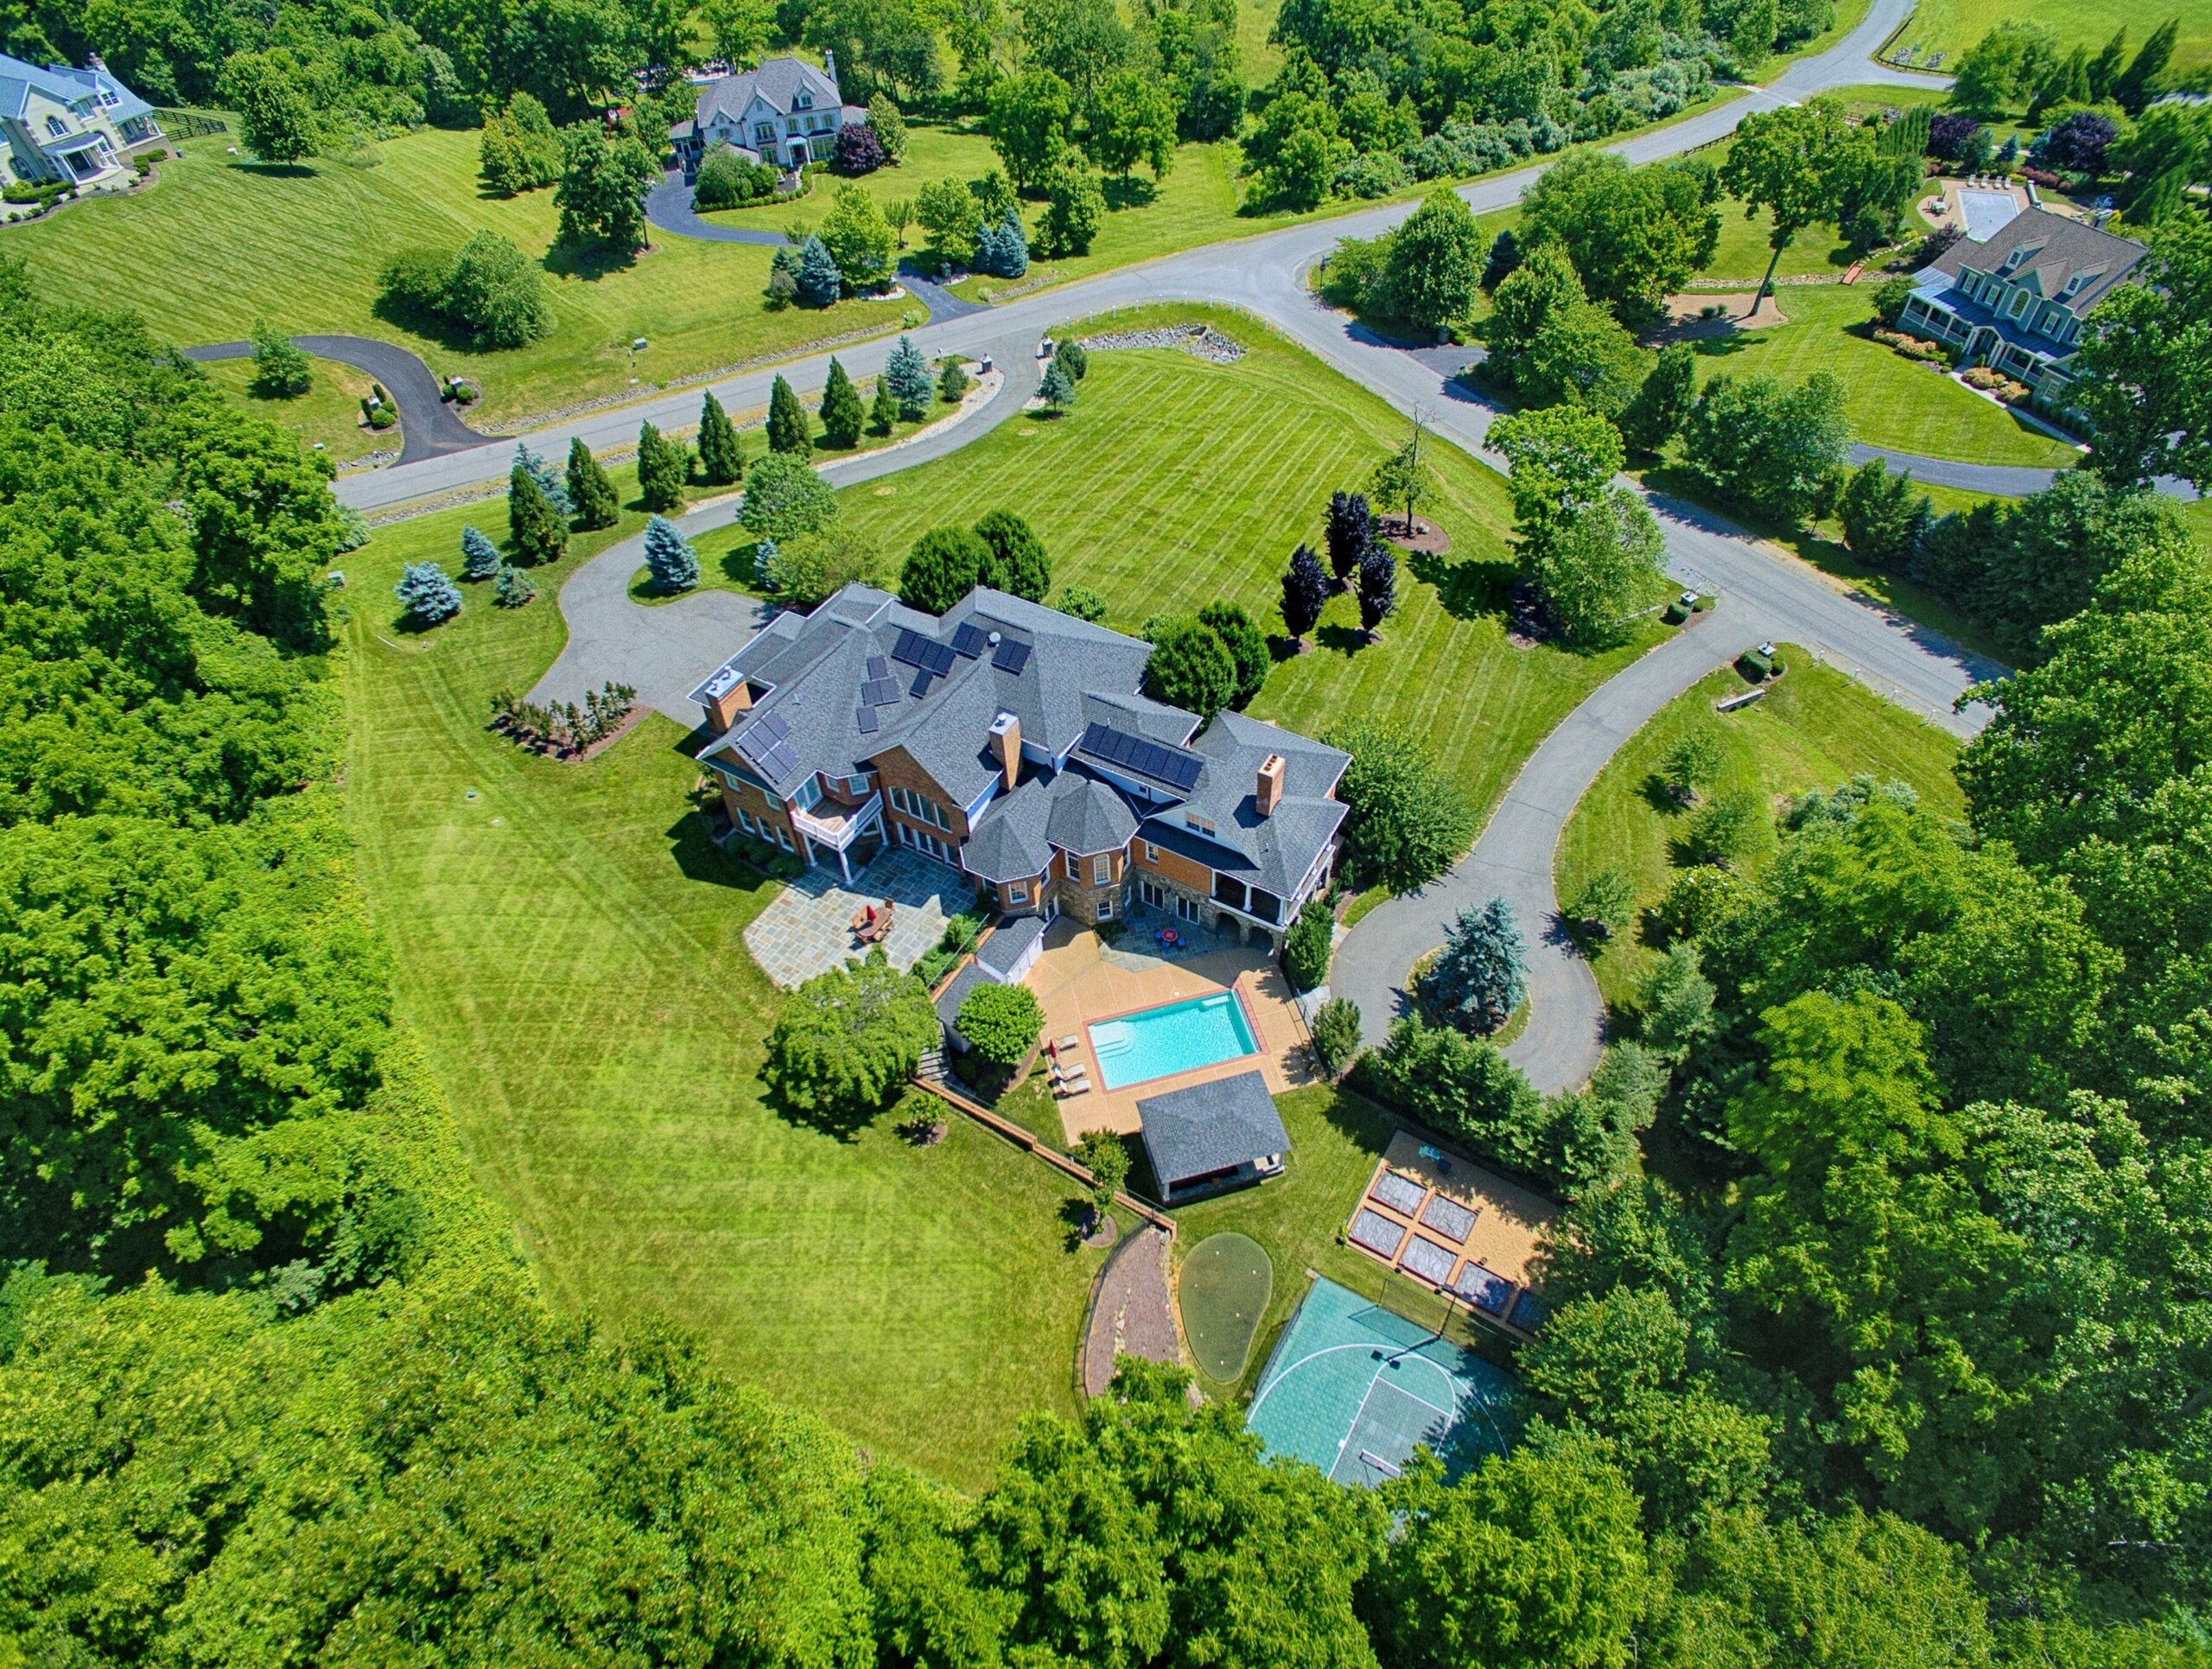 Exterior professional photo of 40573 Spectacular Bid Place - showing the whole property from a drone. Pool, basketball sport court, putting green and landscaping visible